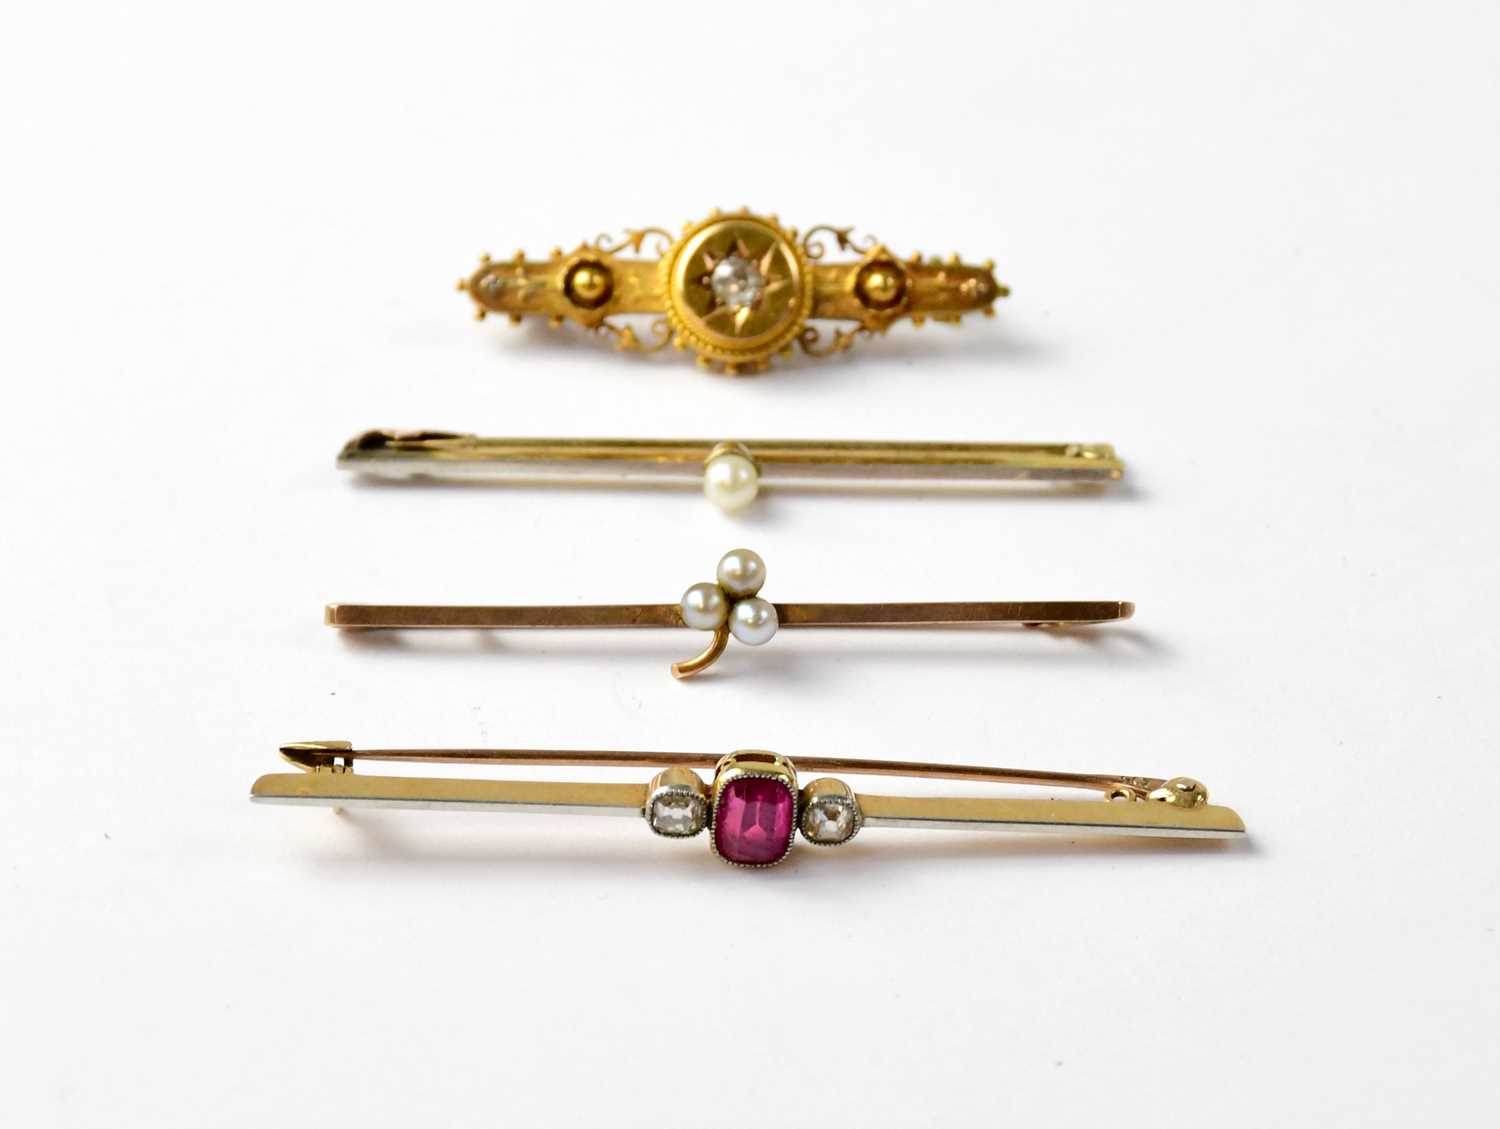 Four Victorian and Edwardian bar brooches comprising a 15ct yellow gold bar brooch with central - Image 2 of 3